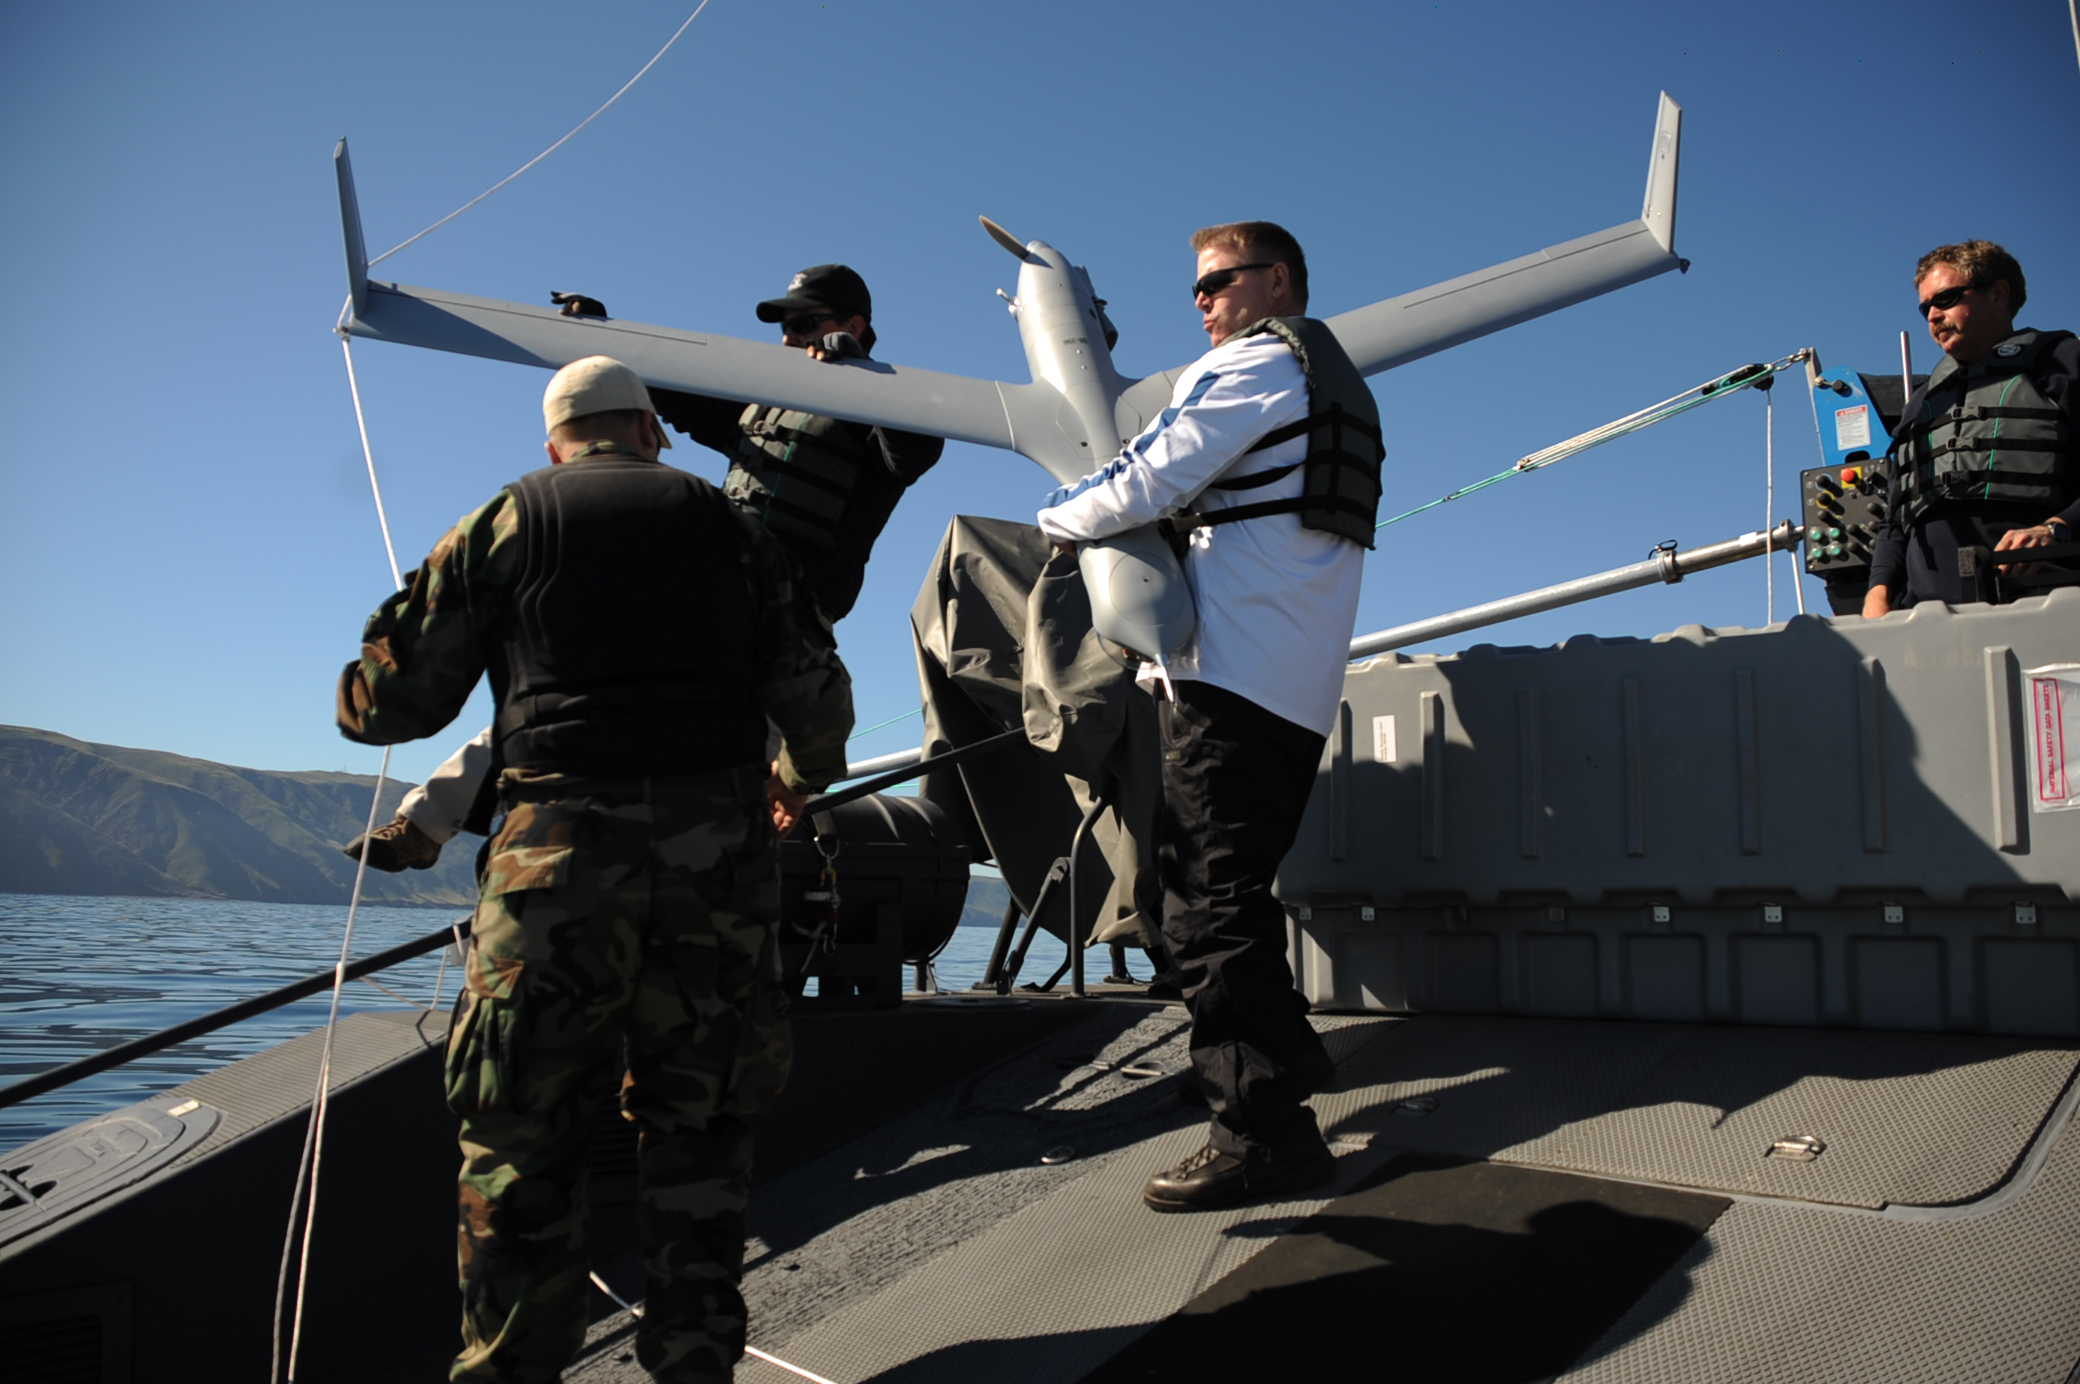 US_Navy_080207-N-5366K-519_Civilian_contractors_recover_a_Scan_Eagle_unmanned_aerial_vehicle_launched_from_a_MK_V_naval_special_warfare_boat_off_the_coast_of_San_Clemente_Island.jpg